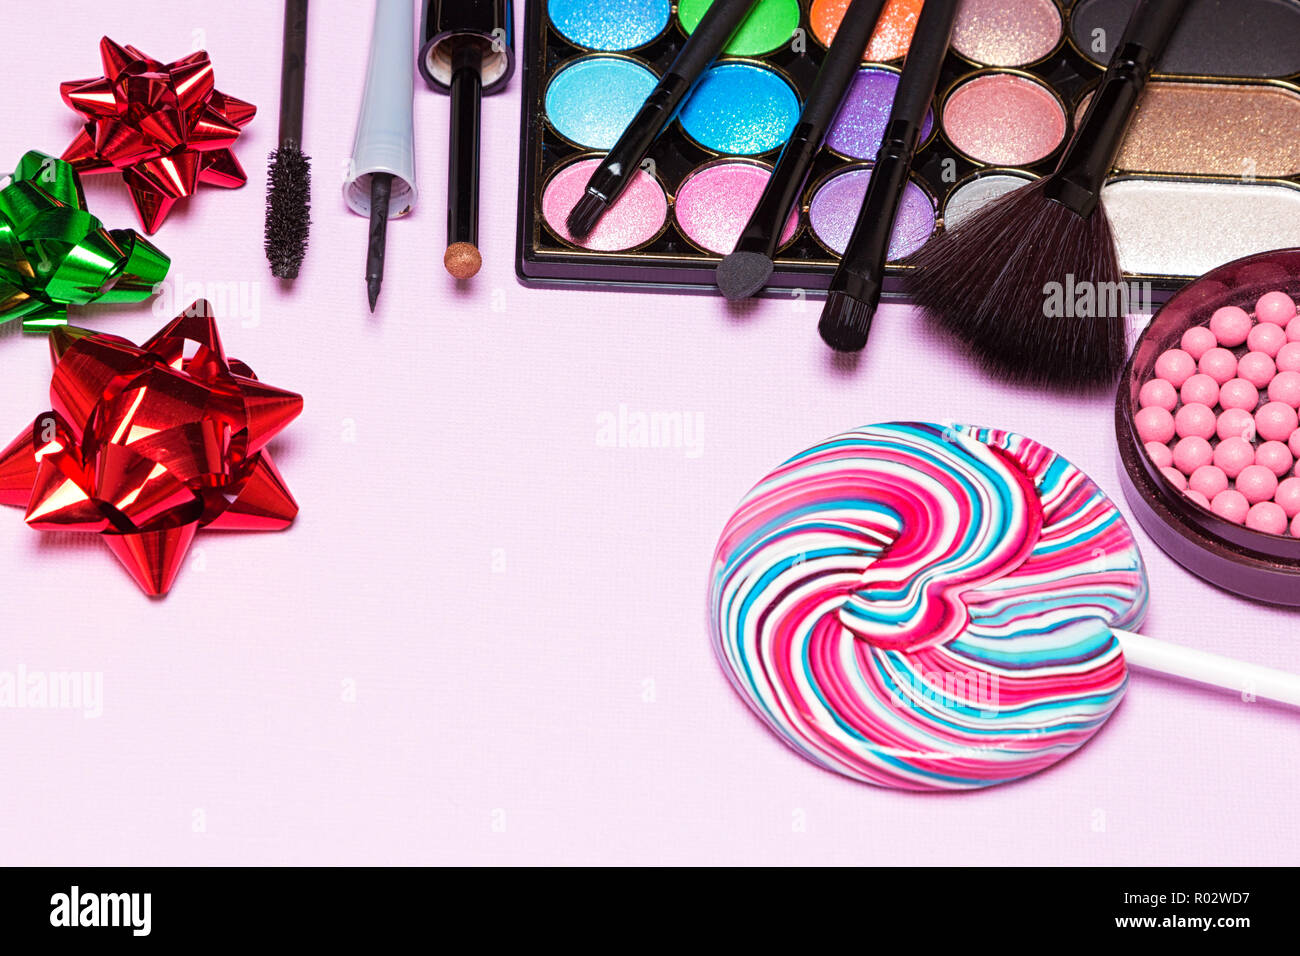 Bright makeup for birthday party. Color glitter eyeshadow, blush, liquid  eyeliner, mascara, make up brushes with lollipop and gift wrap bows. Copy  spa Stock Photo - Alamy